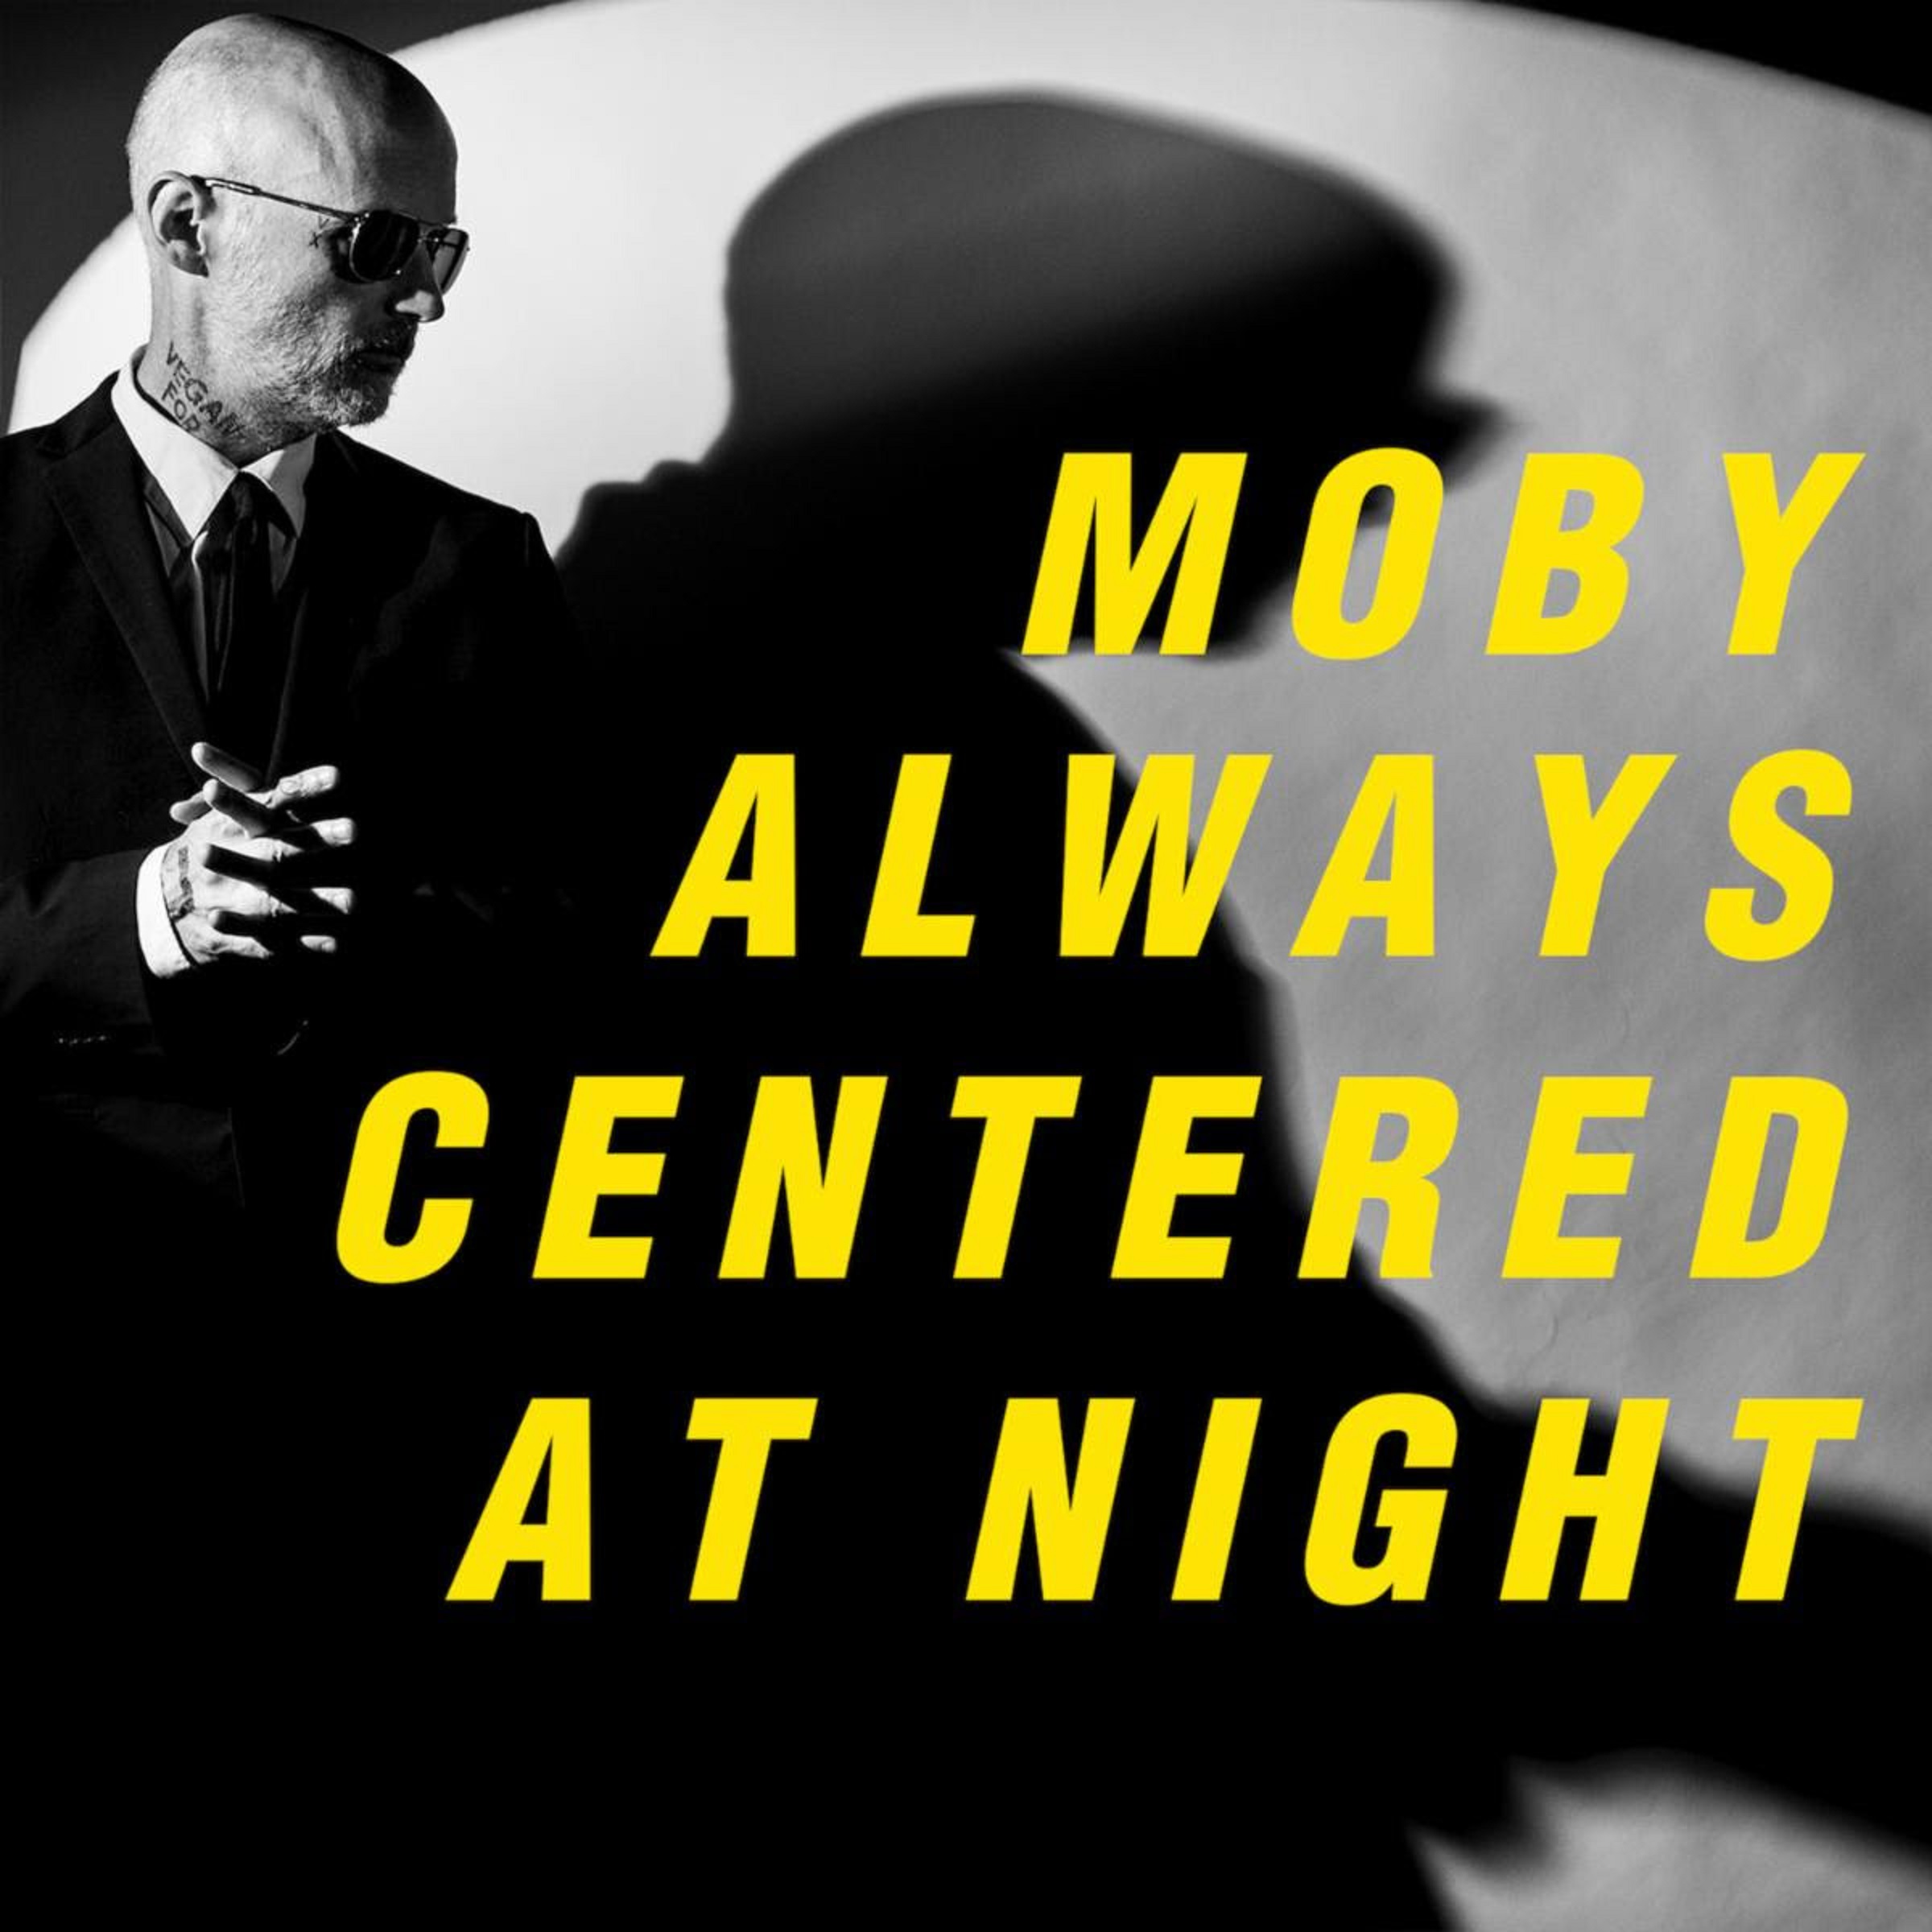 Moby announces Lady Blackbird as UK/Europe tour special guest; Playing greatest hits this Sept with all proceeds benefiting animal rights